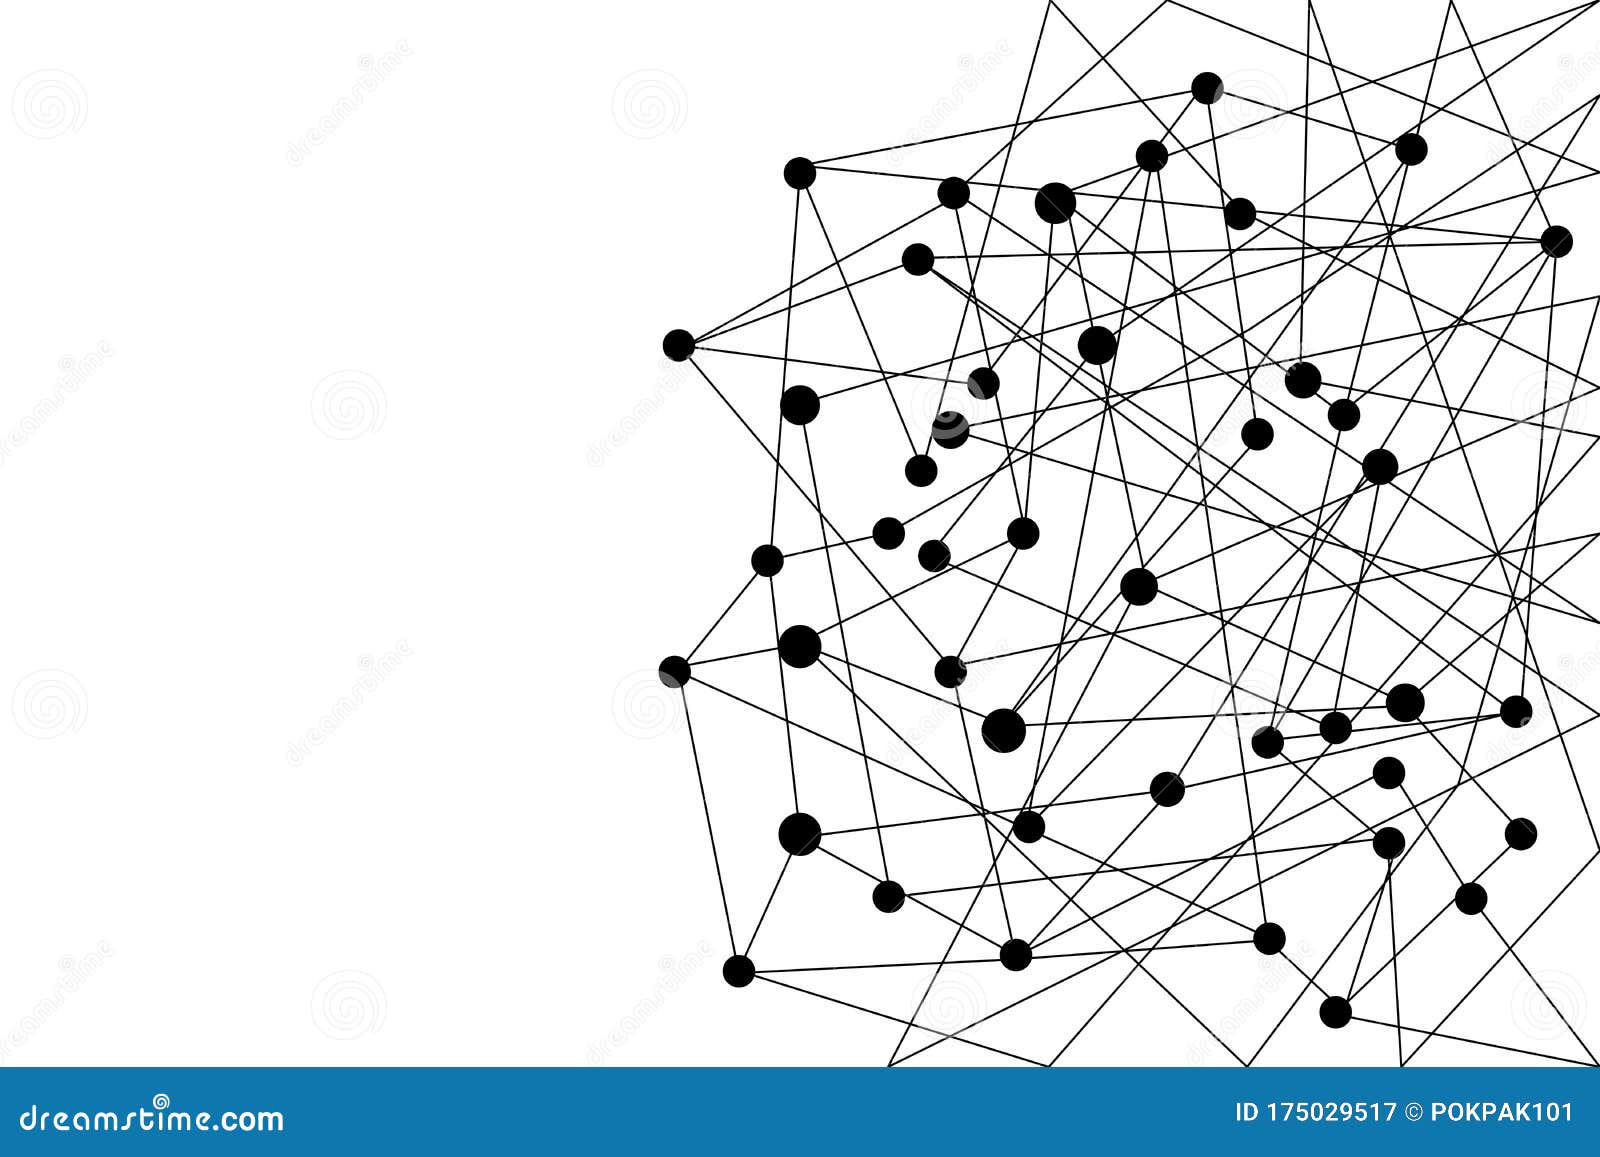 Connecting dots and lines stock vector. Illustration of grid - 175029517